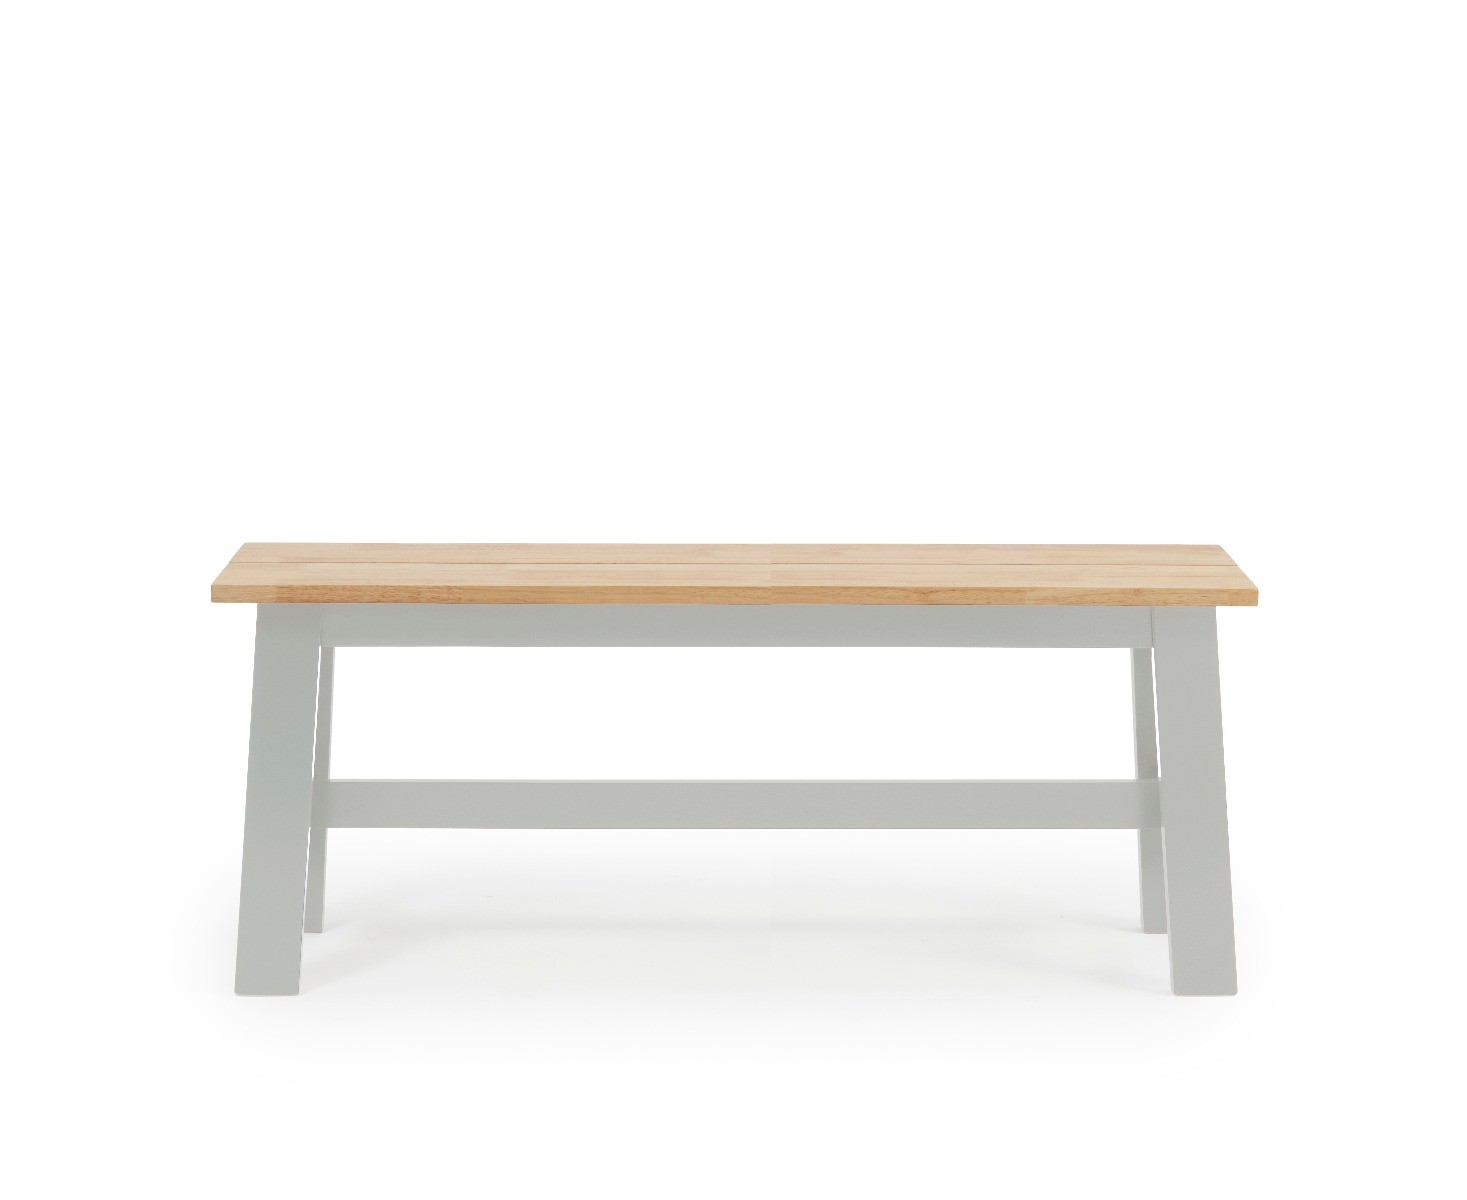 Photo 1 of Chiltern large grey and oak bench